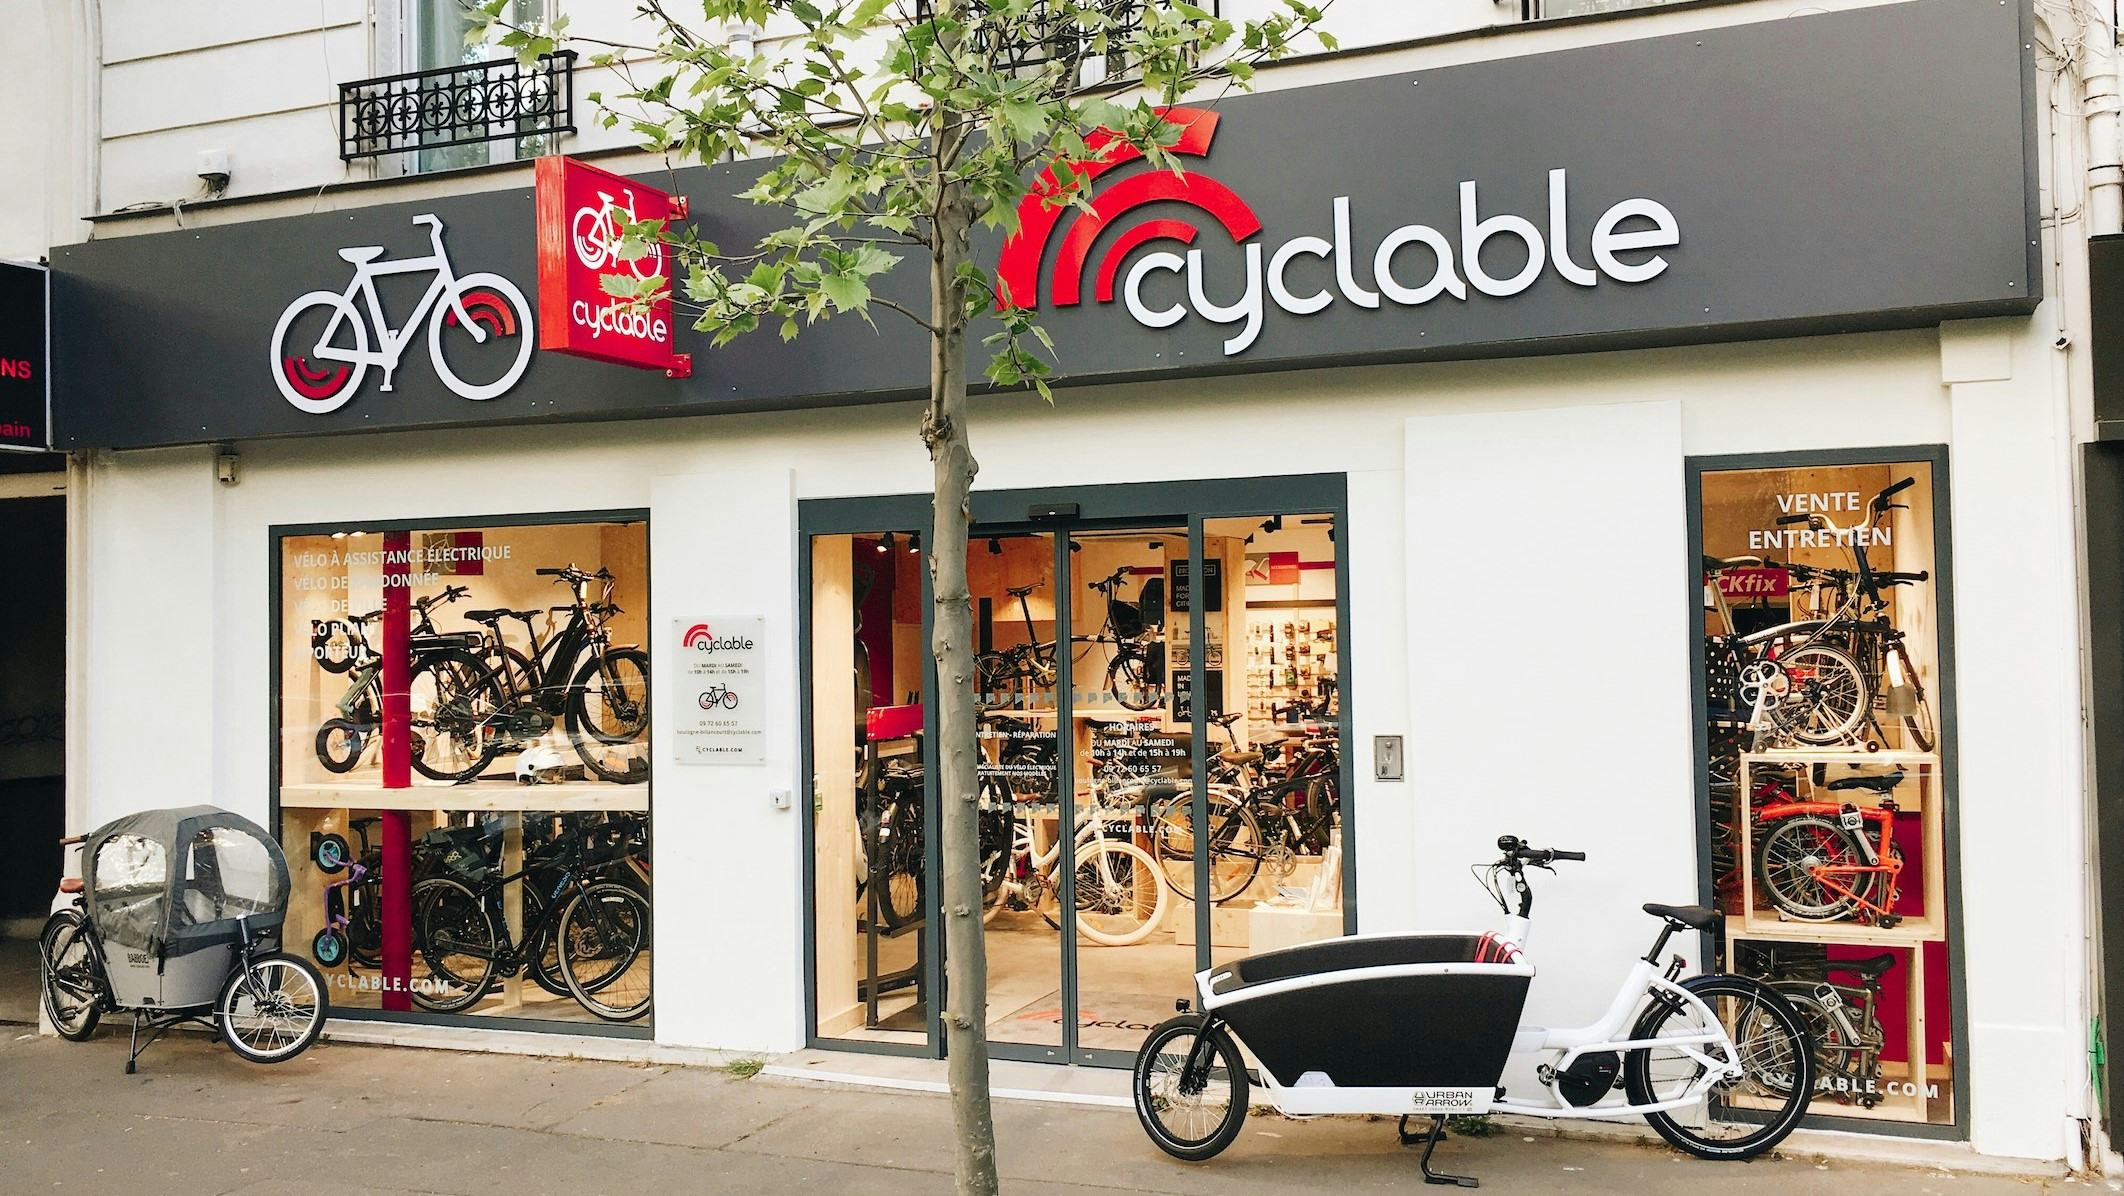 The French retail group Cyclable generated a turn-over of €60 million in 2021 with more than 60 stores. – Photo Cyclable